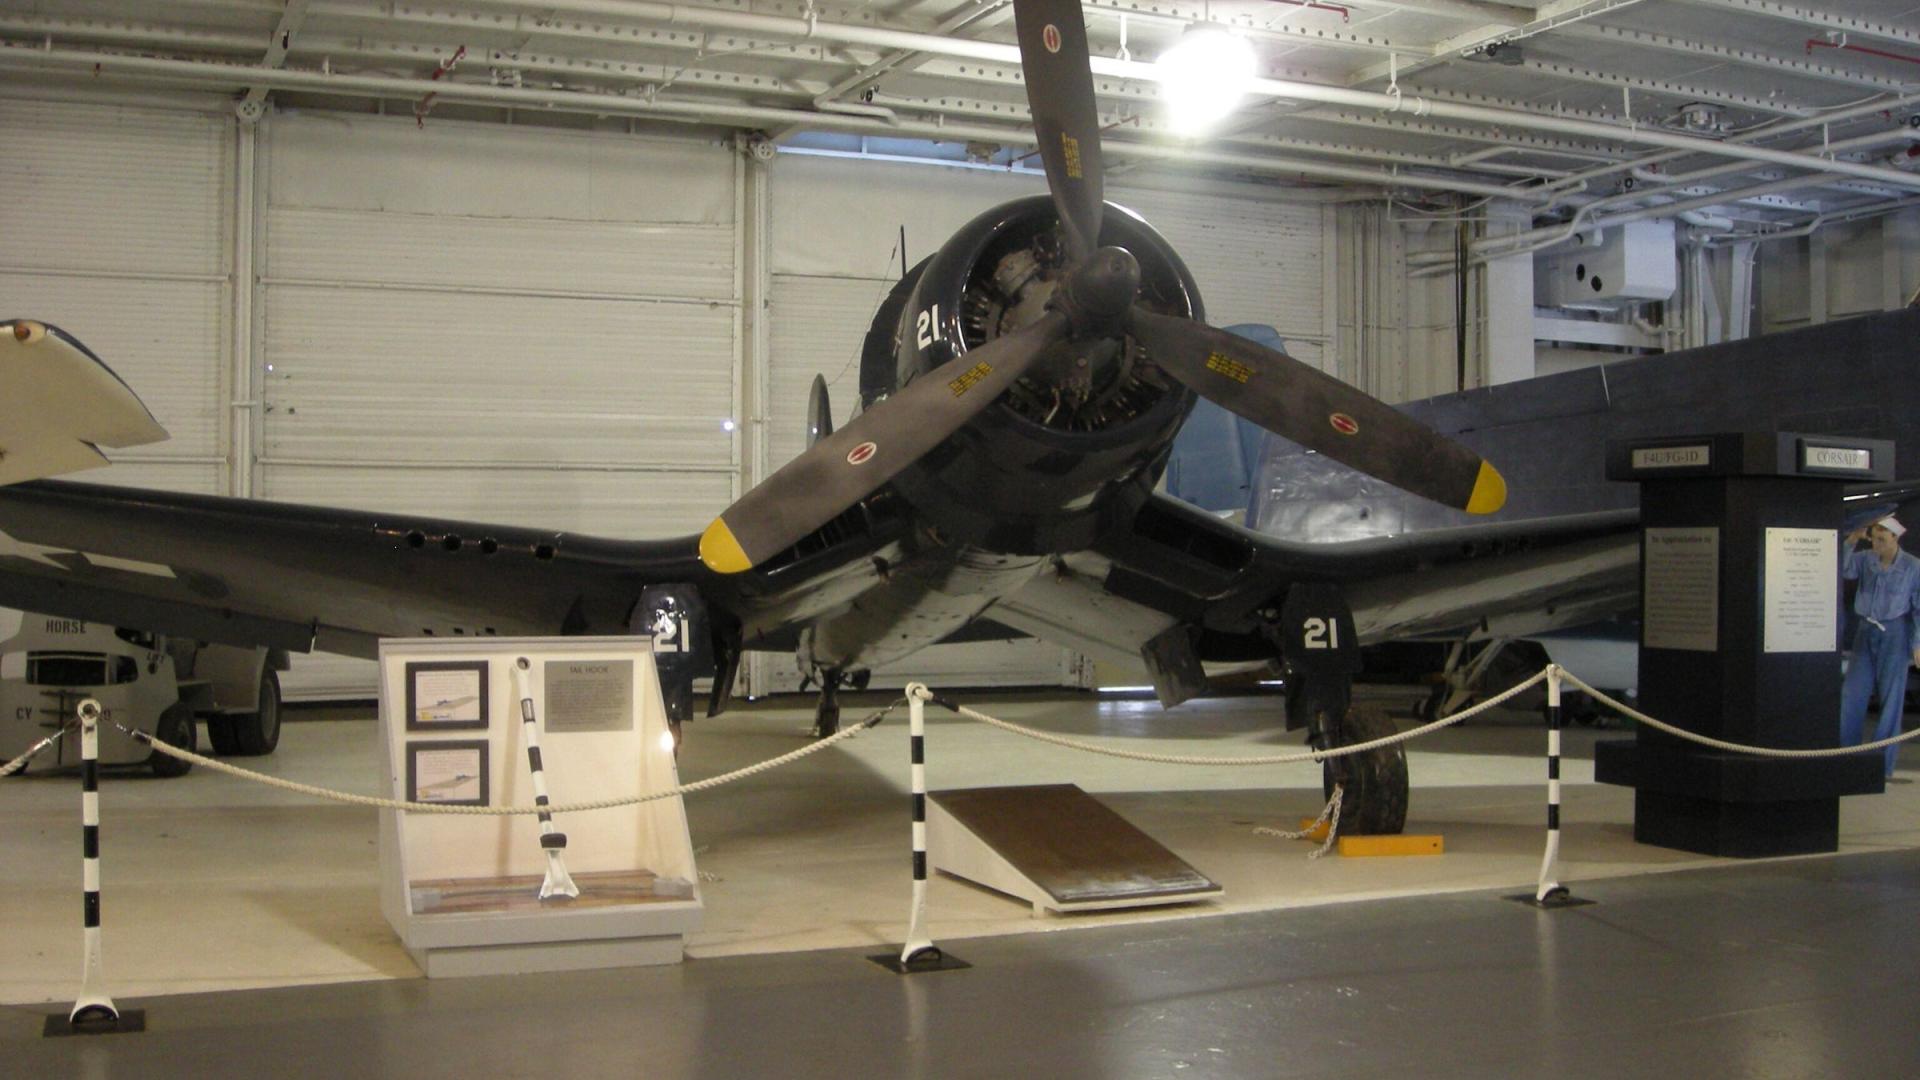 Primary Image of FG-1D Corsair